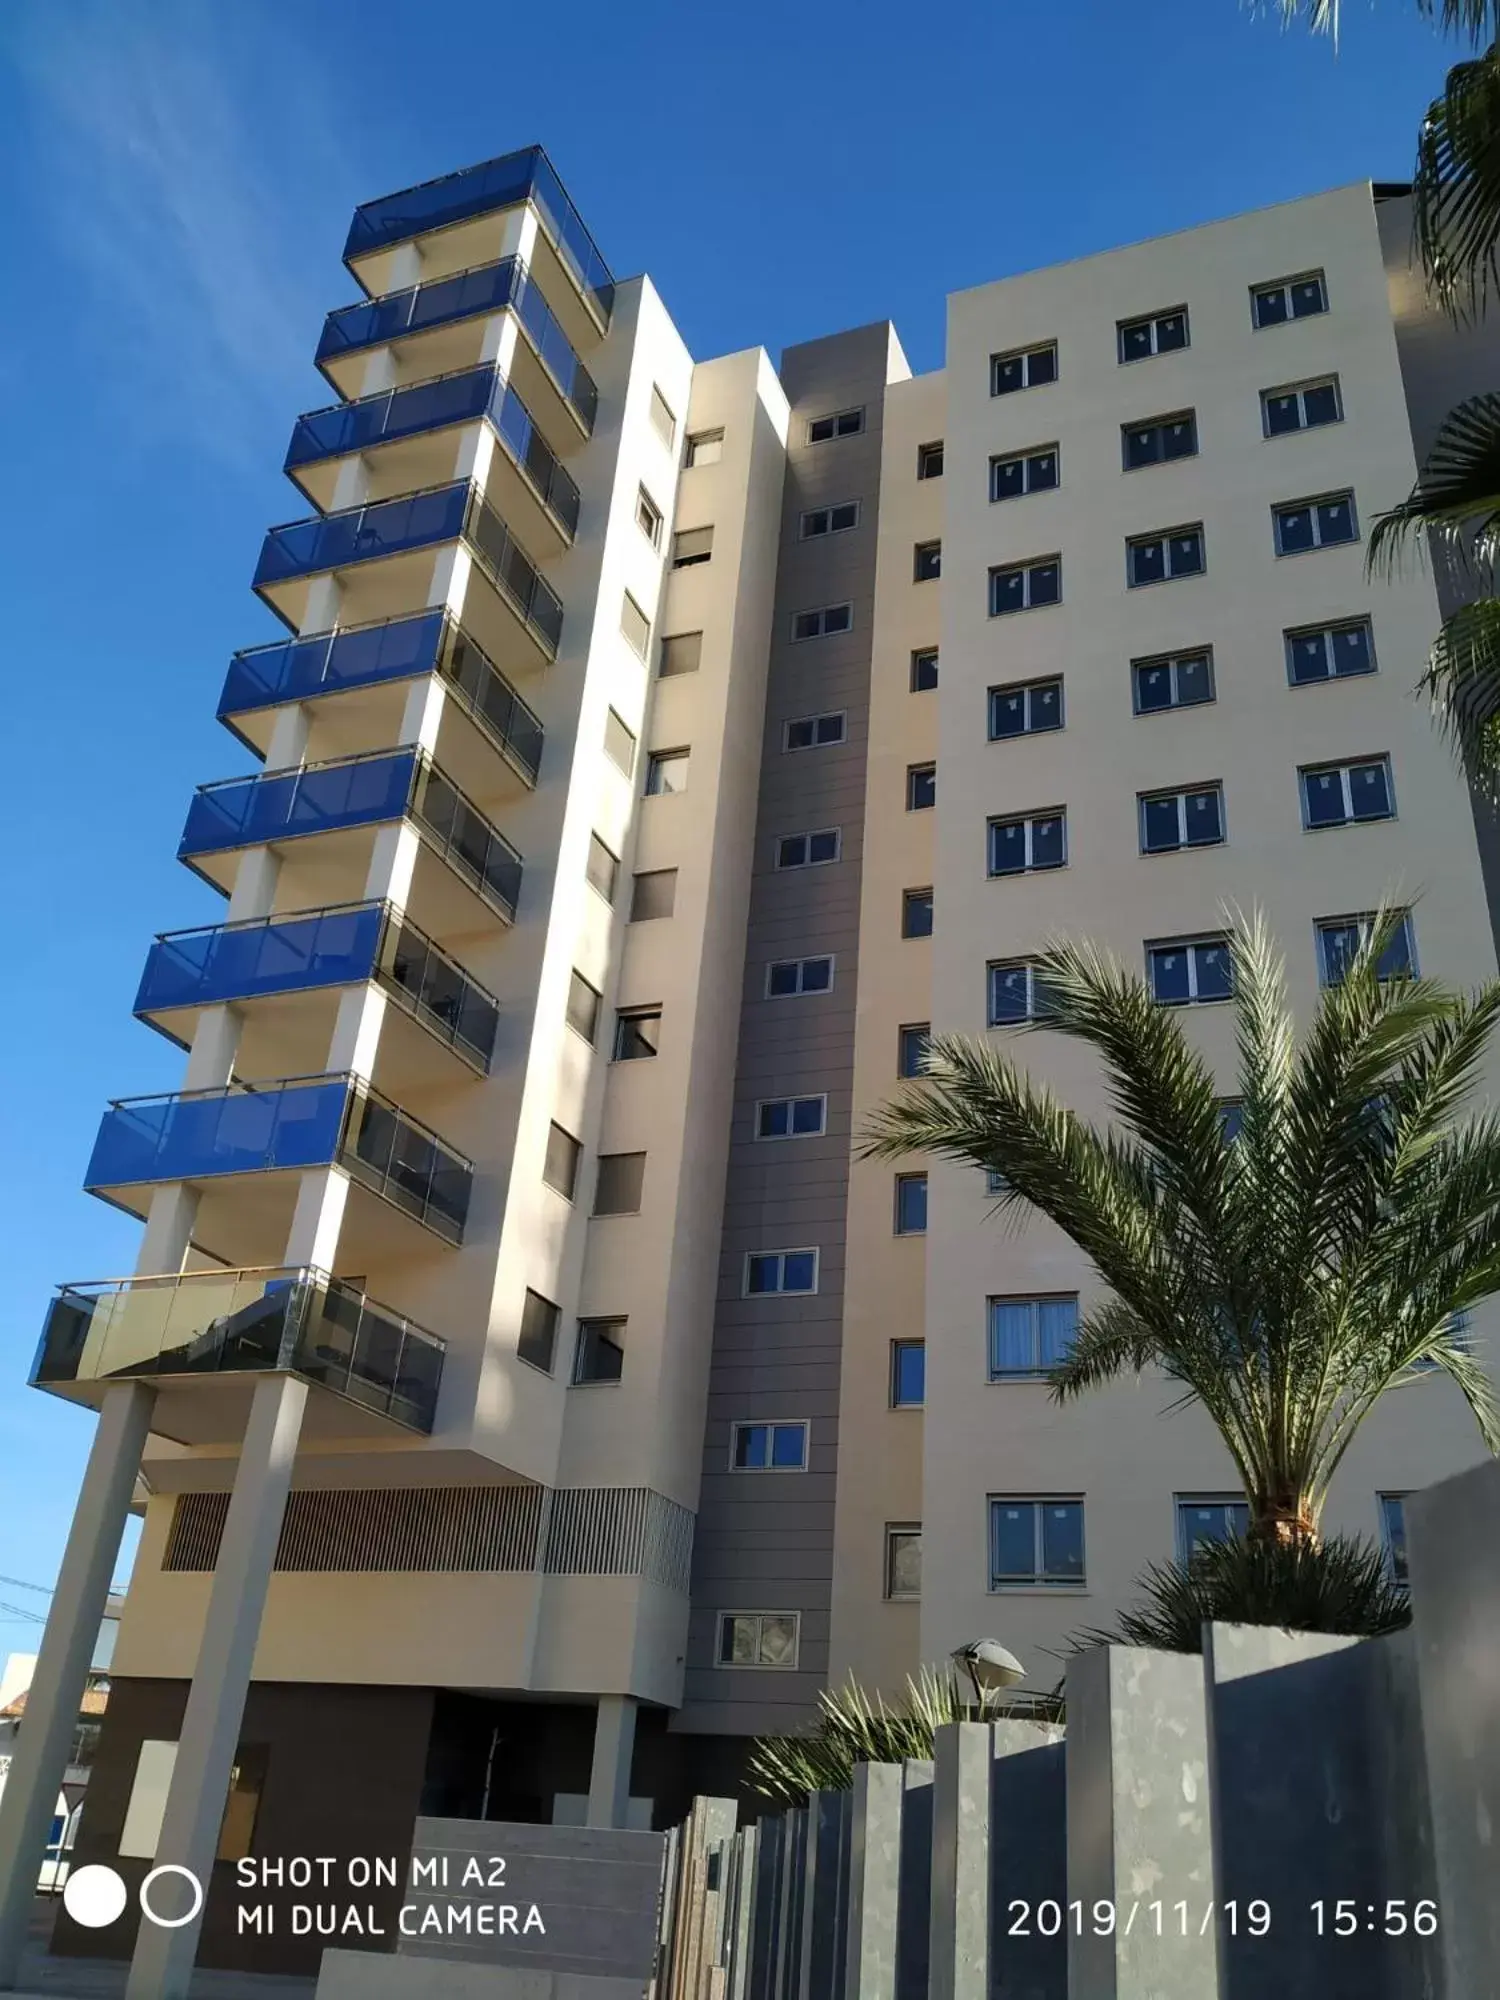 Property Building in Ahoy Apartments